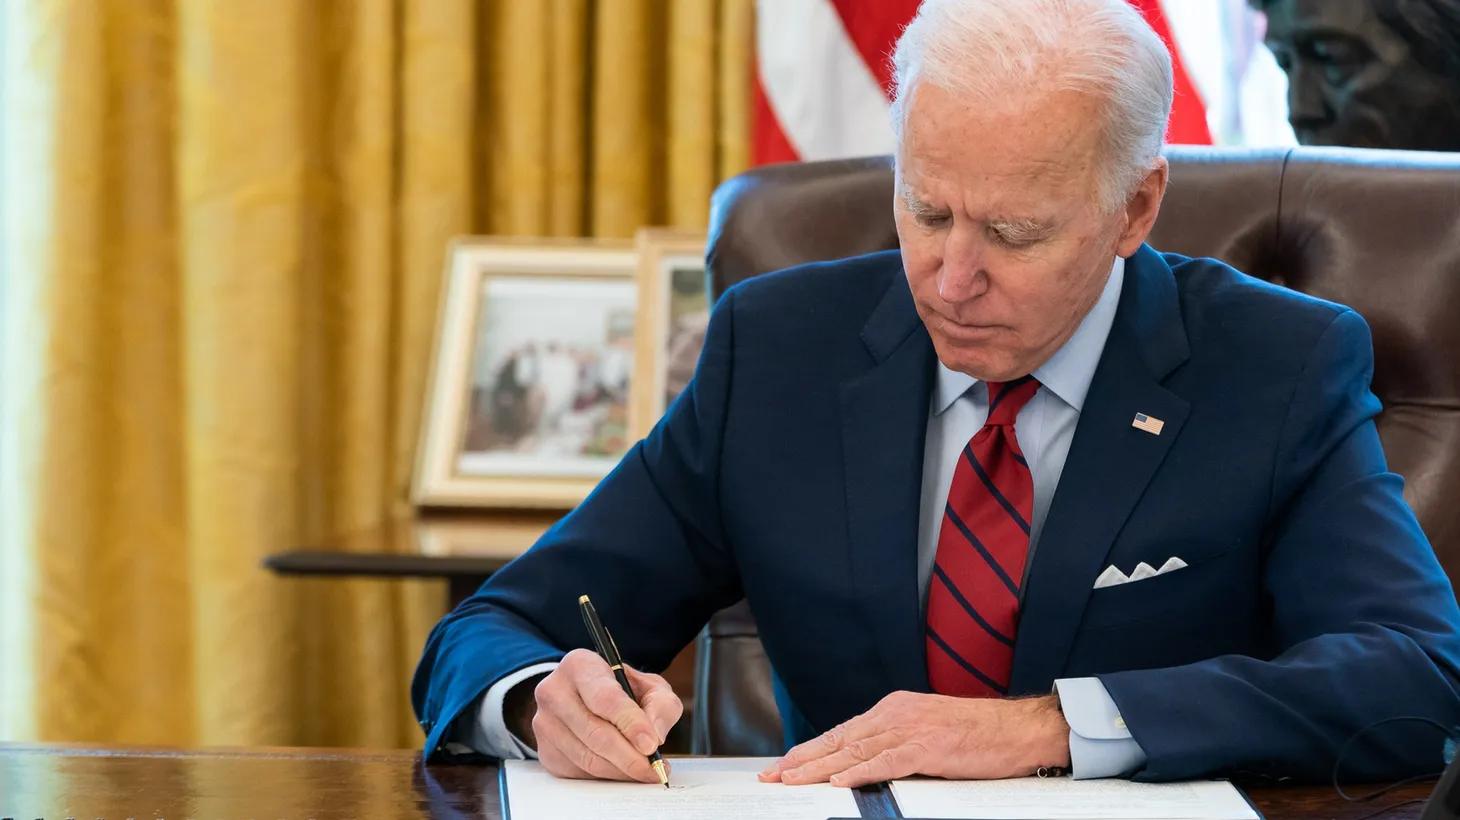 “President Biden is getting in line behind California and encouraging more states to do what California and the other legalization states have started doing,” says Leaflt Senior Editor David Downs.